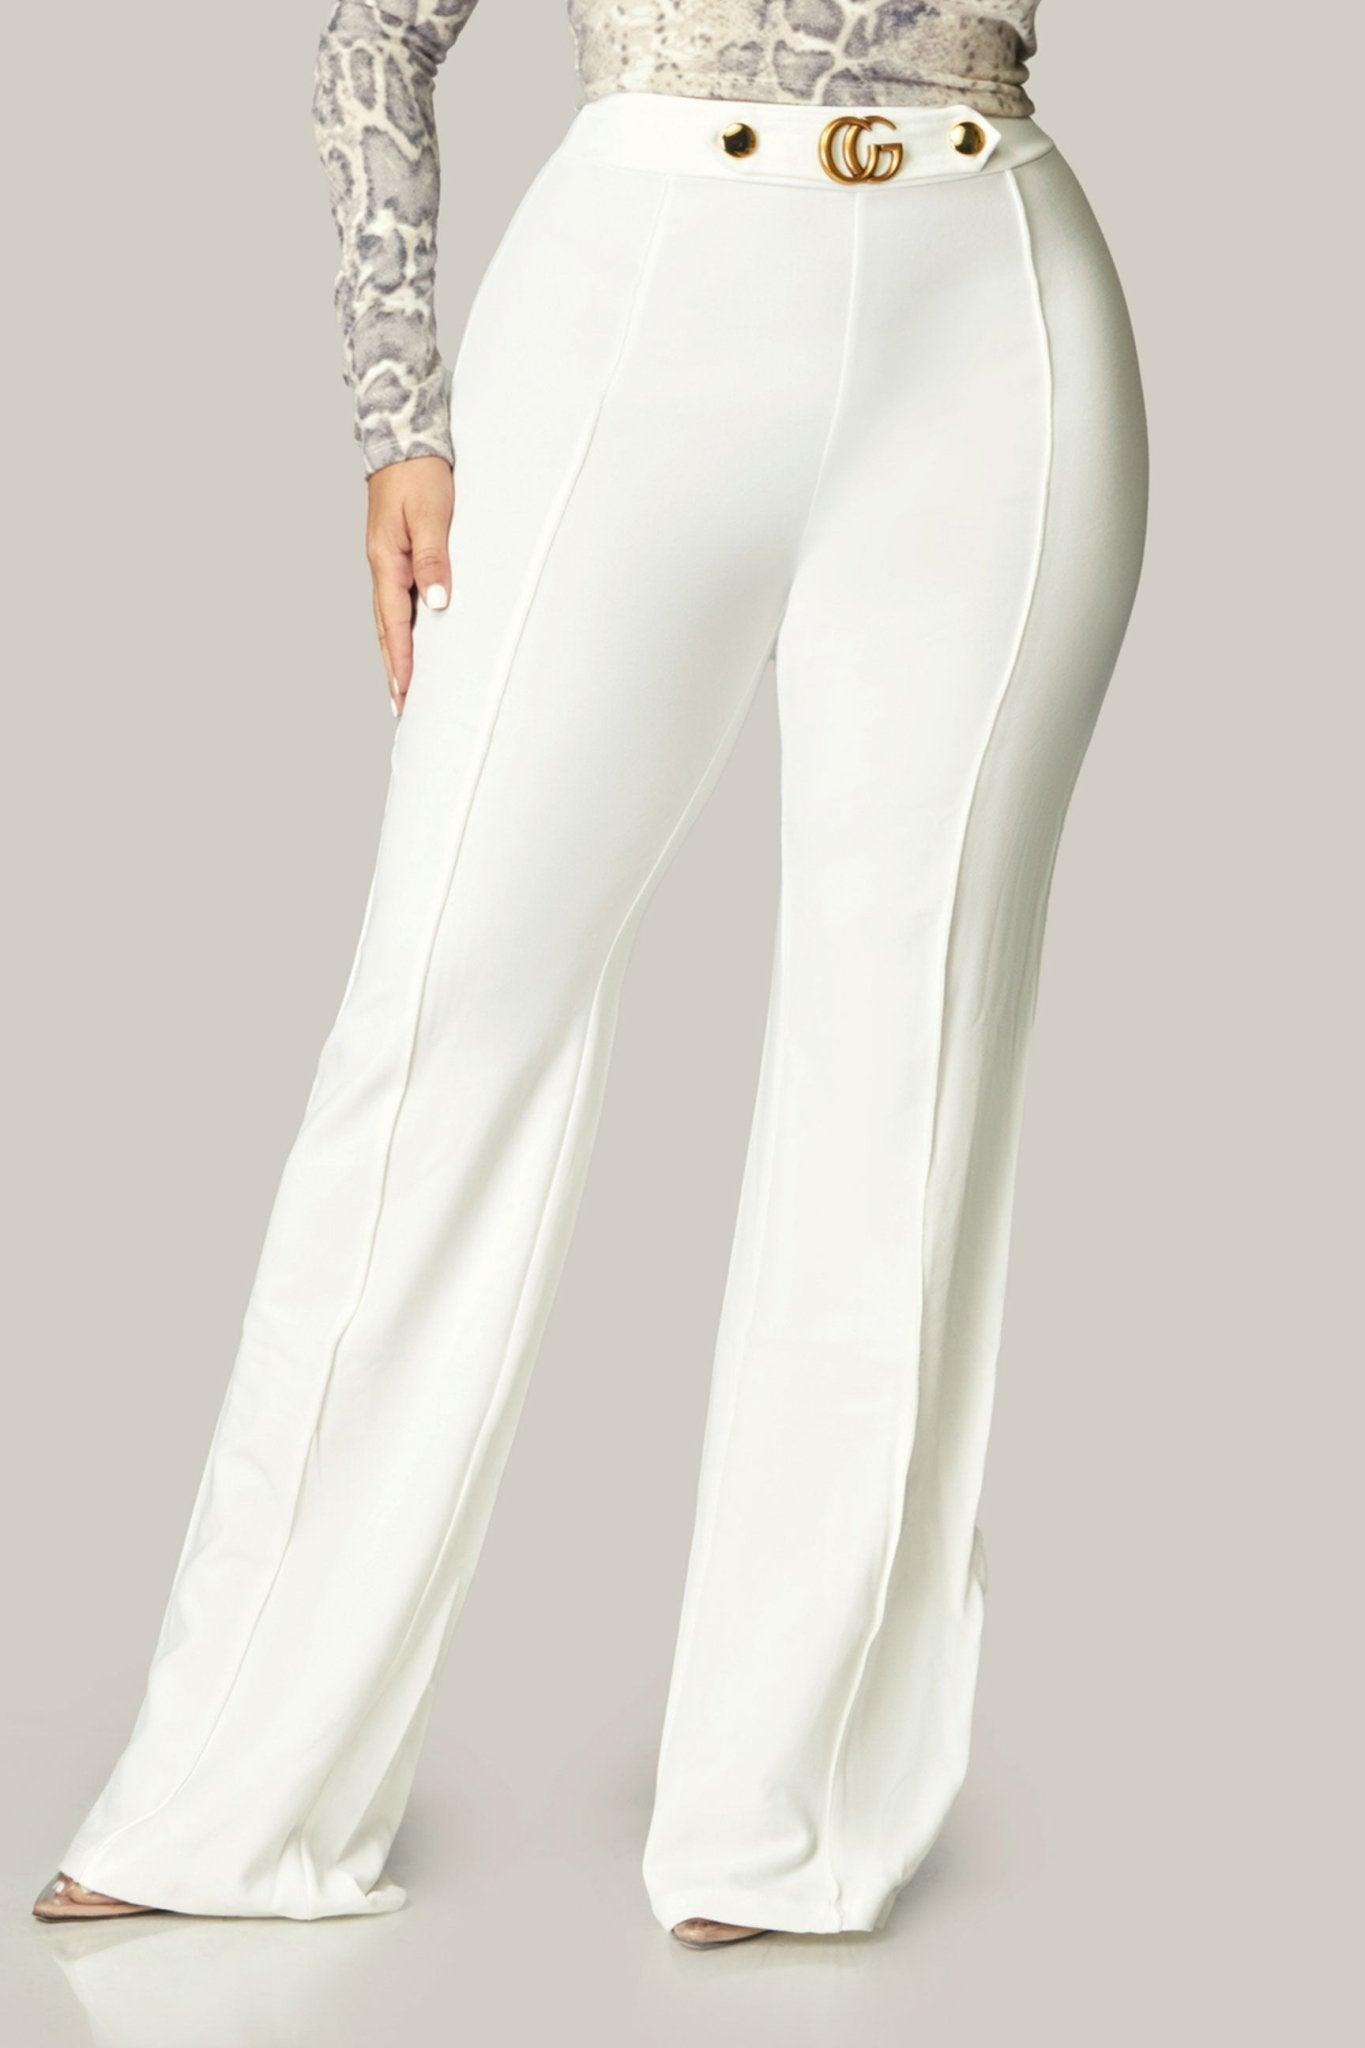 Gina CG Buckle and Button Detail High Waist Pants - MY SEXY STYLES